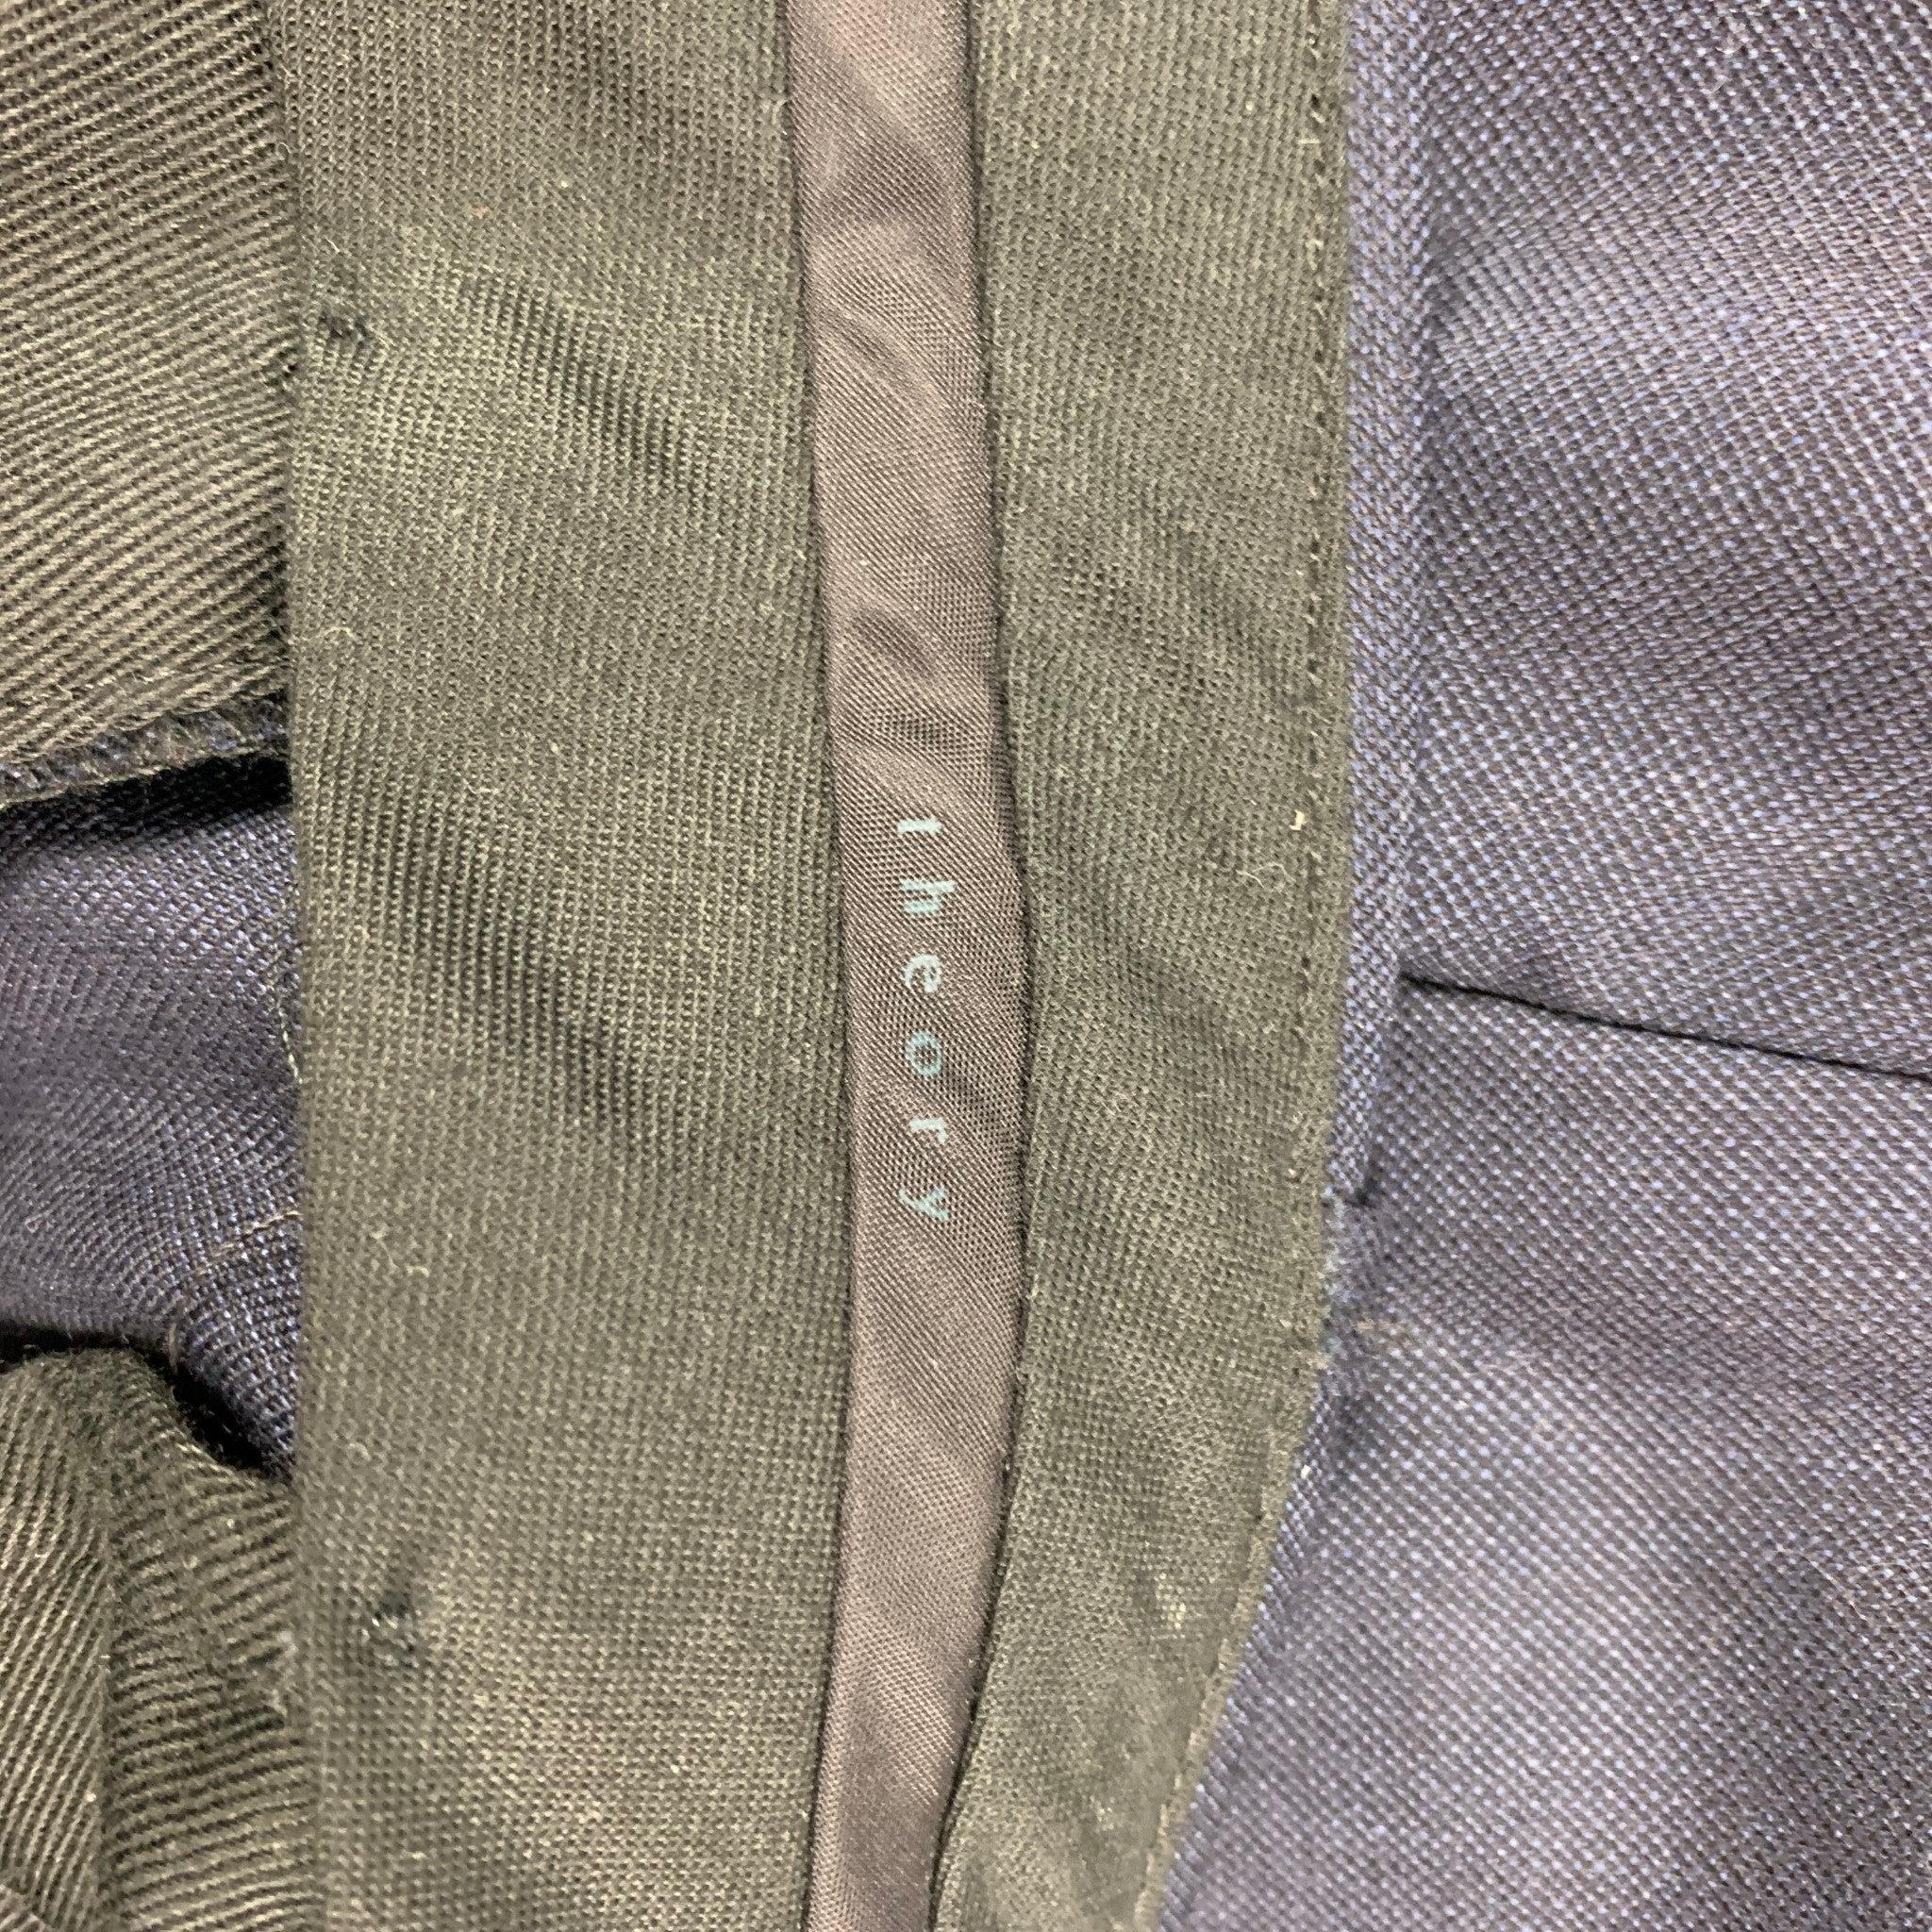 THEORY Size 31 Navy Wool Cuffed Dress Pants For Sale 1